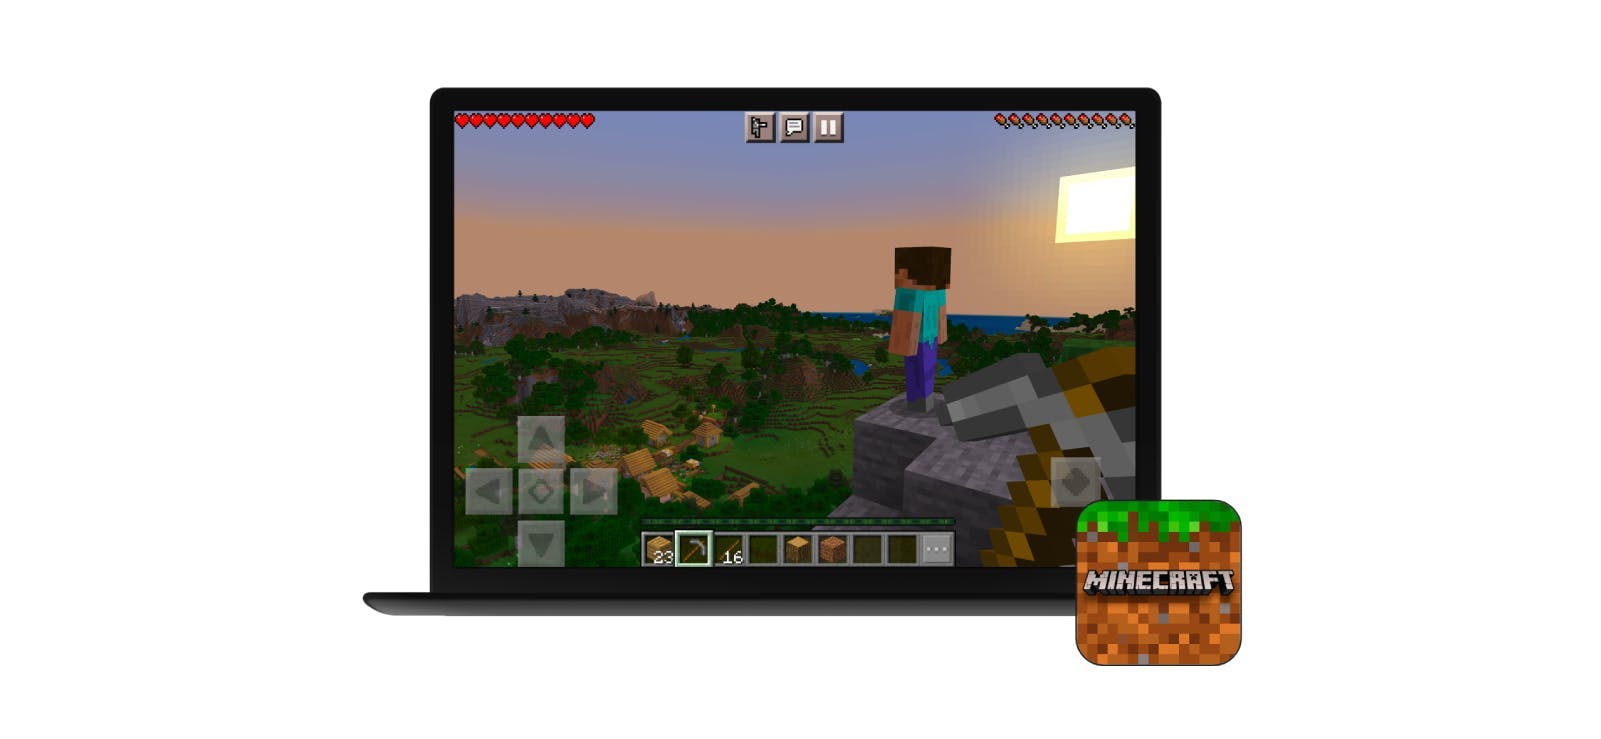 The early access version Minecraft: Bedrock Edition shown on a Chromebook, with the Minecraft logo to the bottom left.